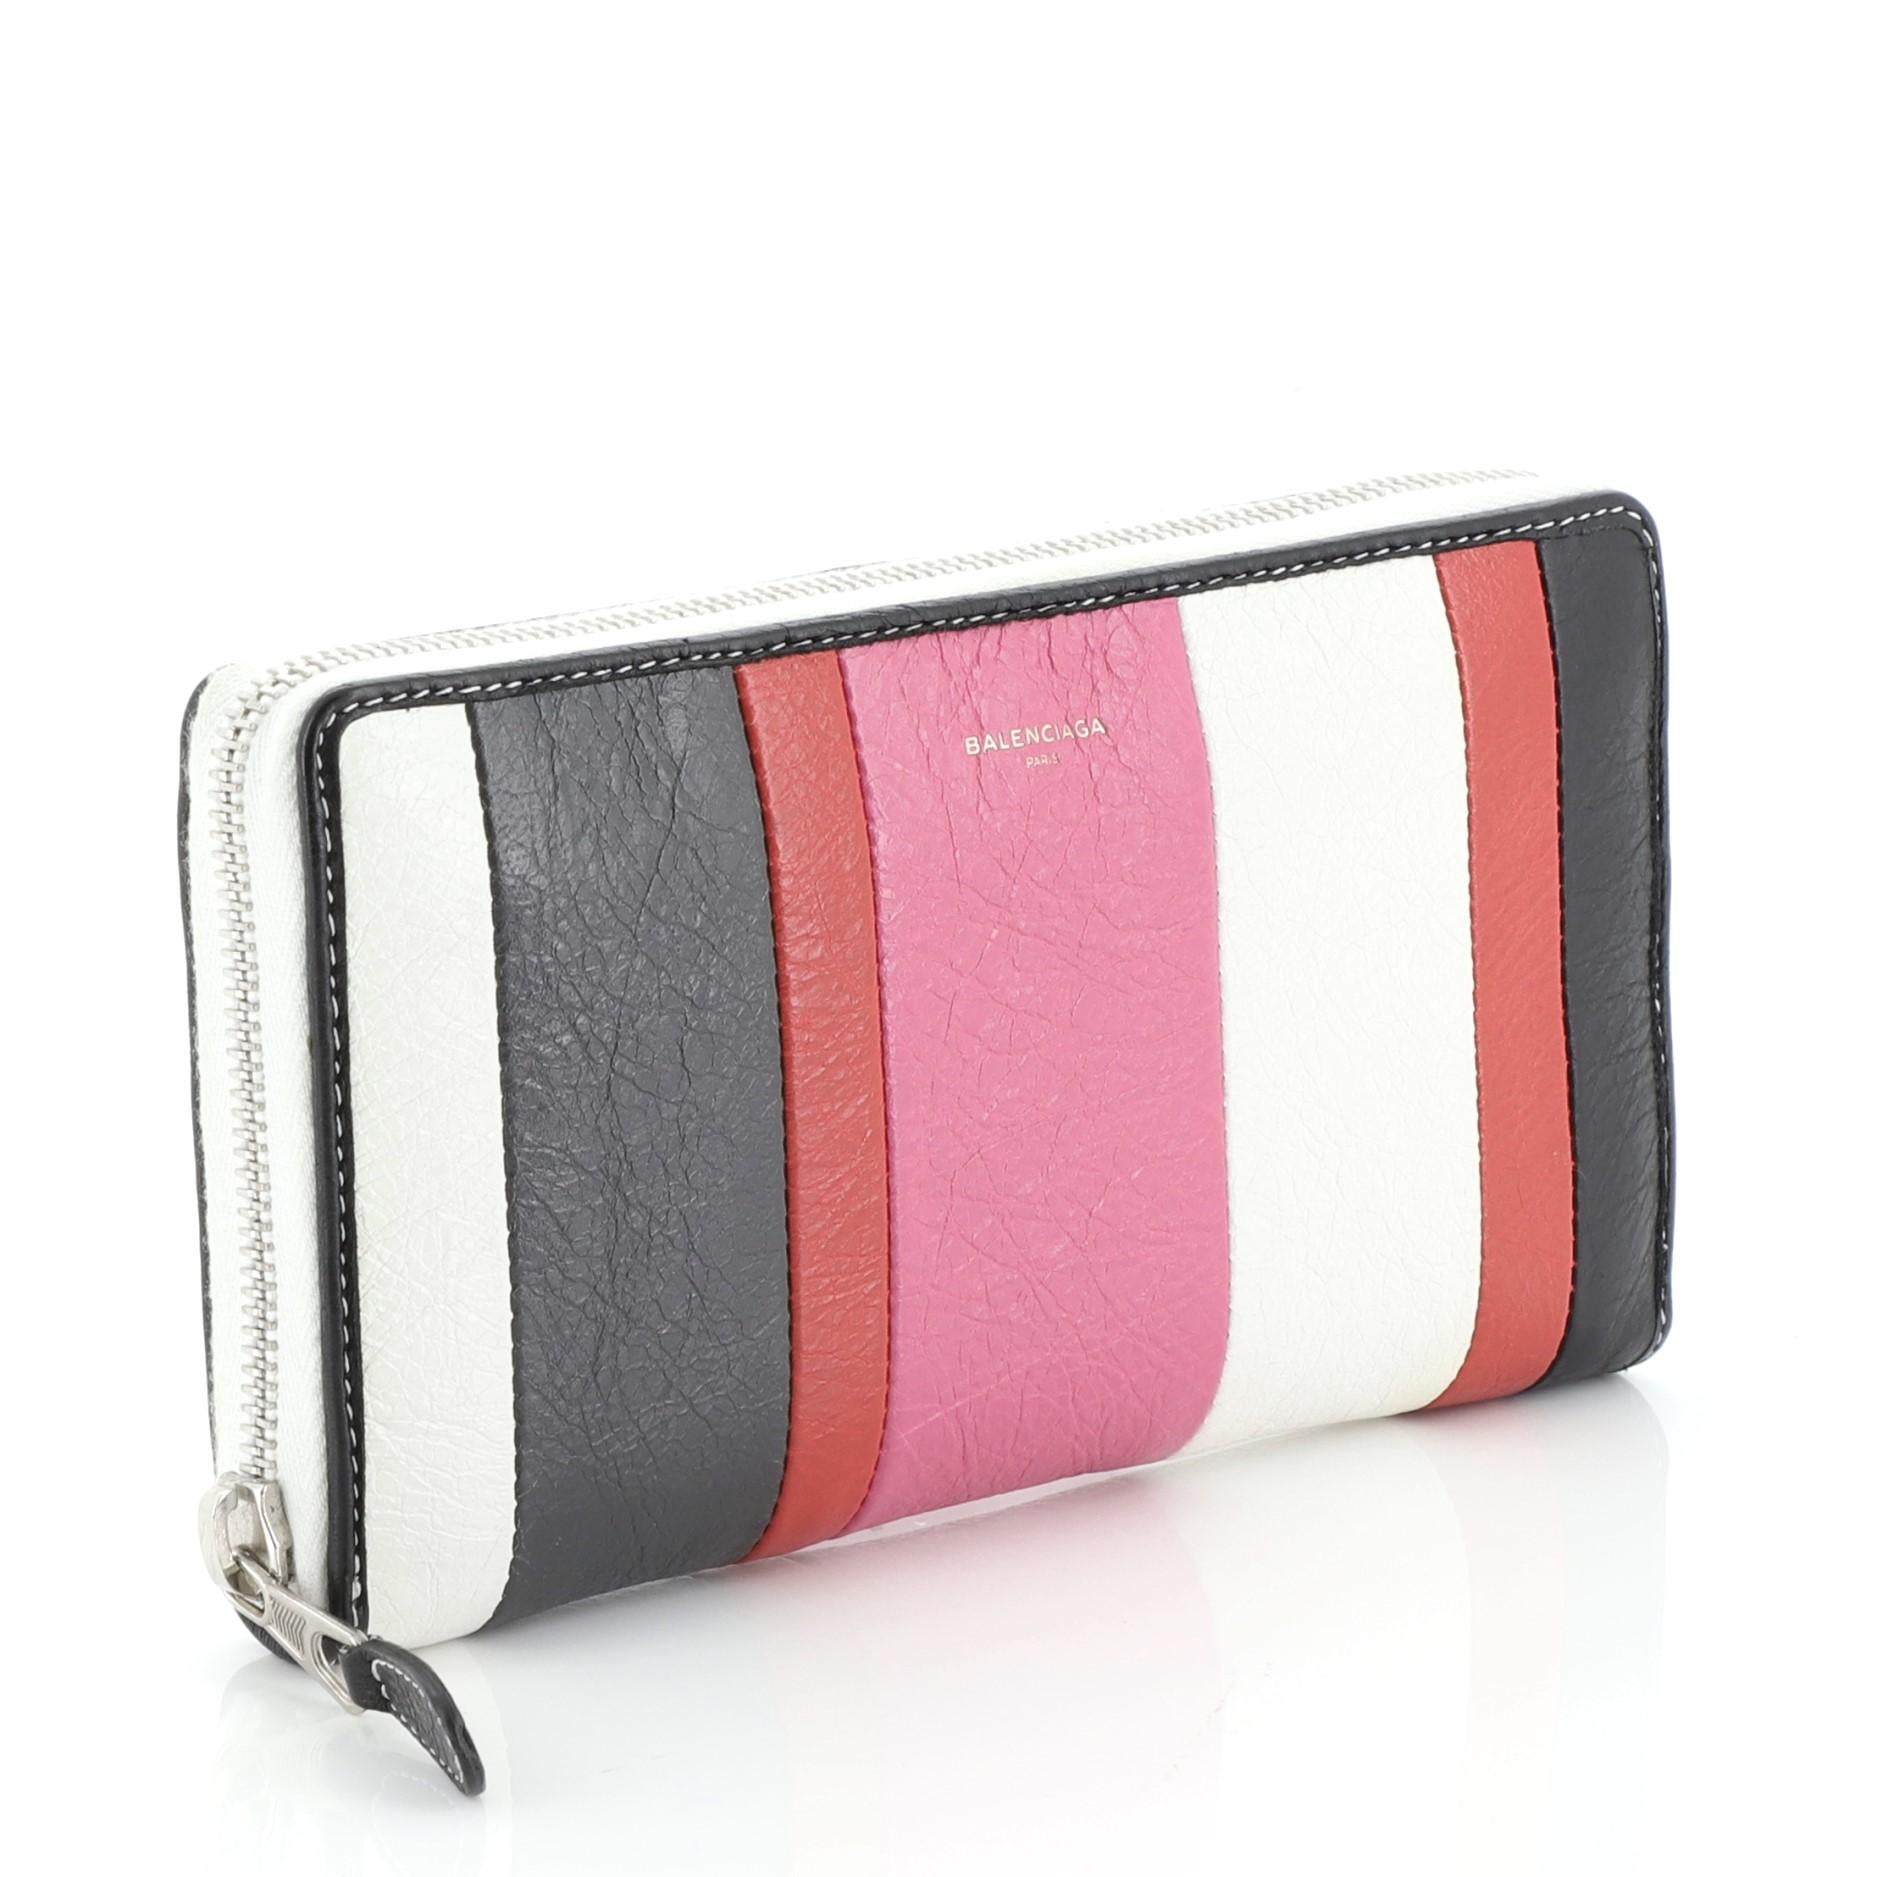 This Balenciaga Bazar Zip Wallet Striped Leather Long, crafted in white, red and multicolor leather, features silver-tone hardware. Its zip closure opens to a black leather and fabric interior with multiple card slots and zip pocket.

Estimated